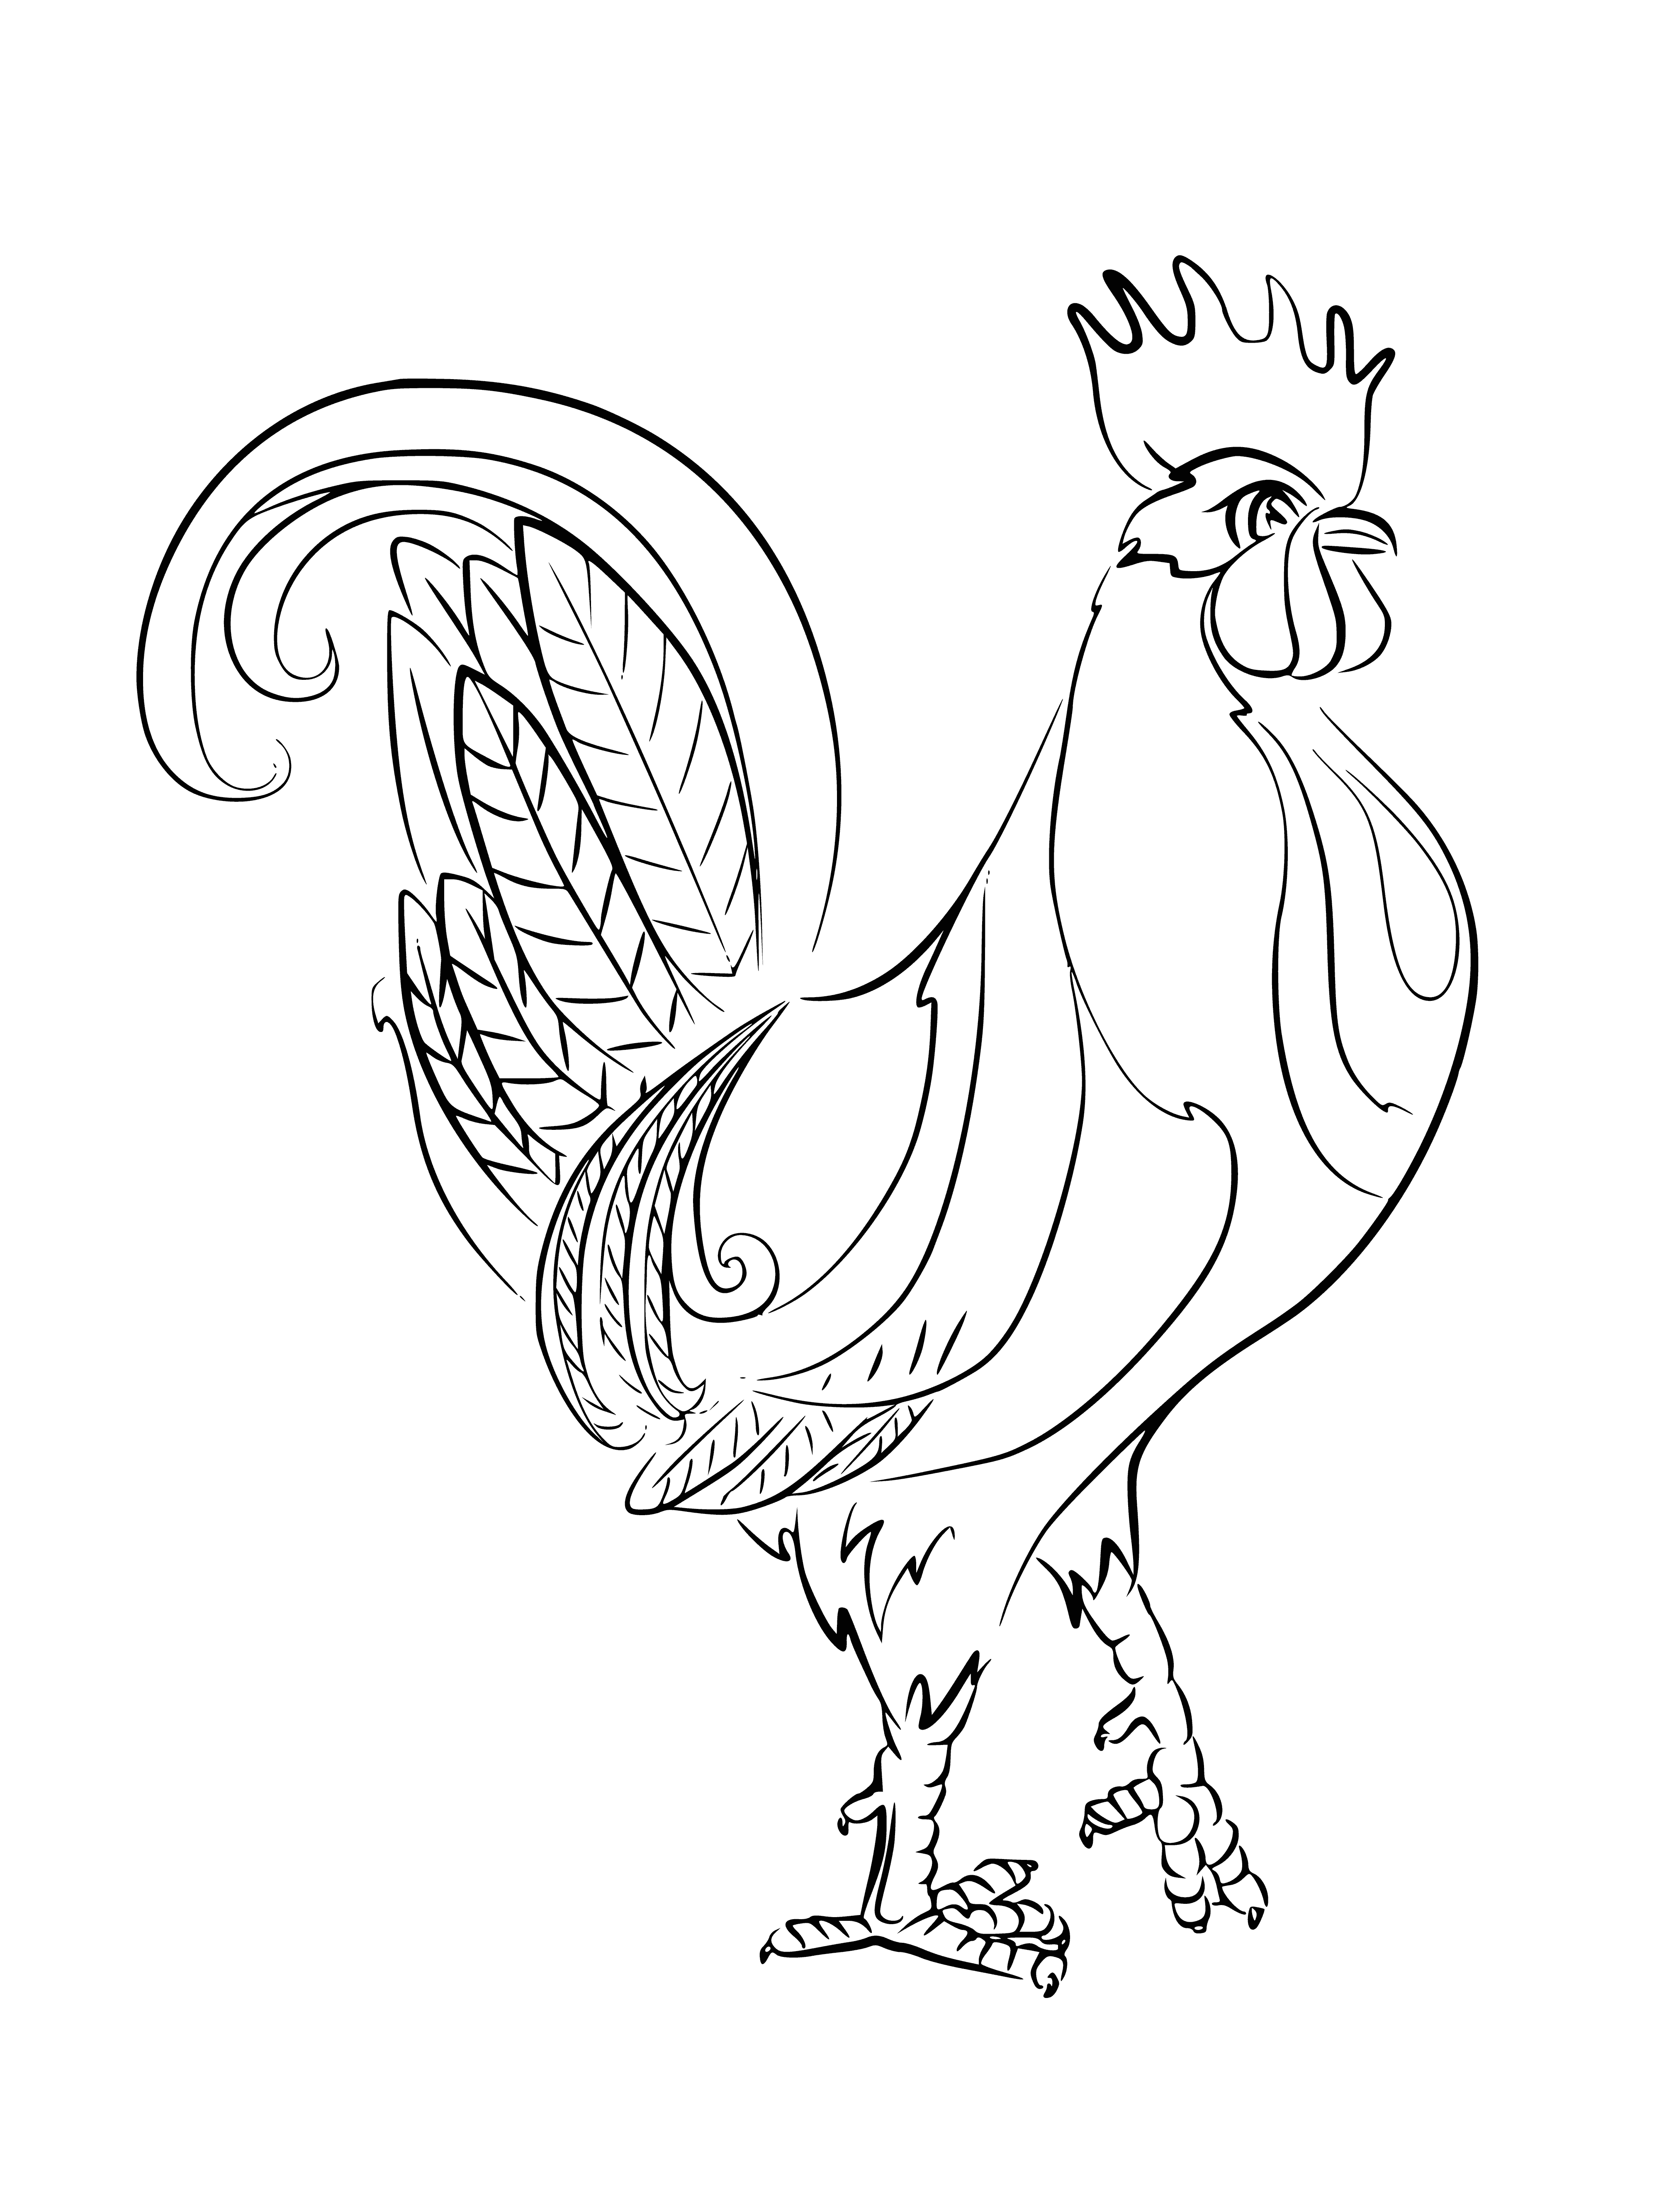 coloring page: Three roosters: Two brown, one white w/ yellow eyes, all facing same direction; two on a fence, one on ground.